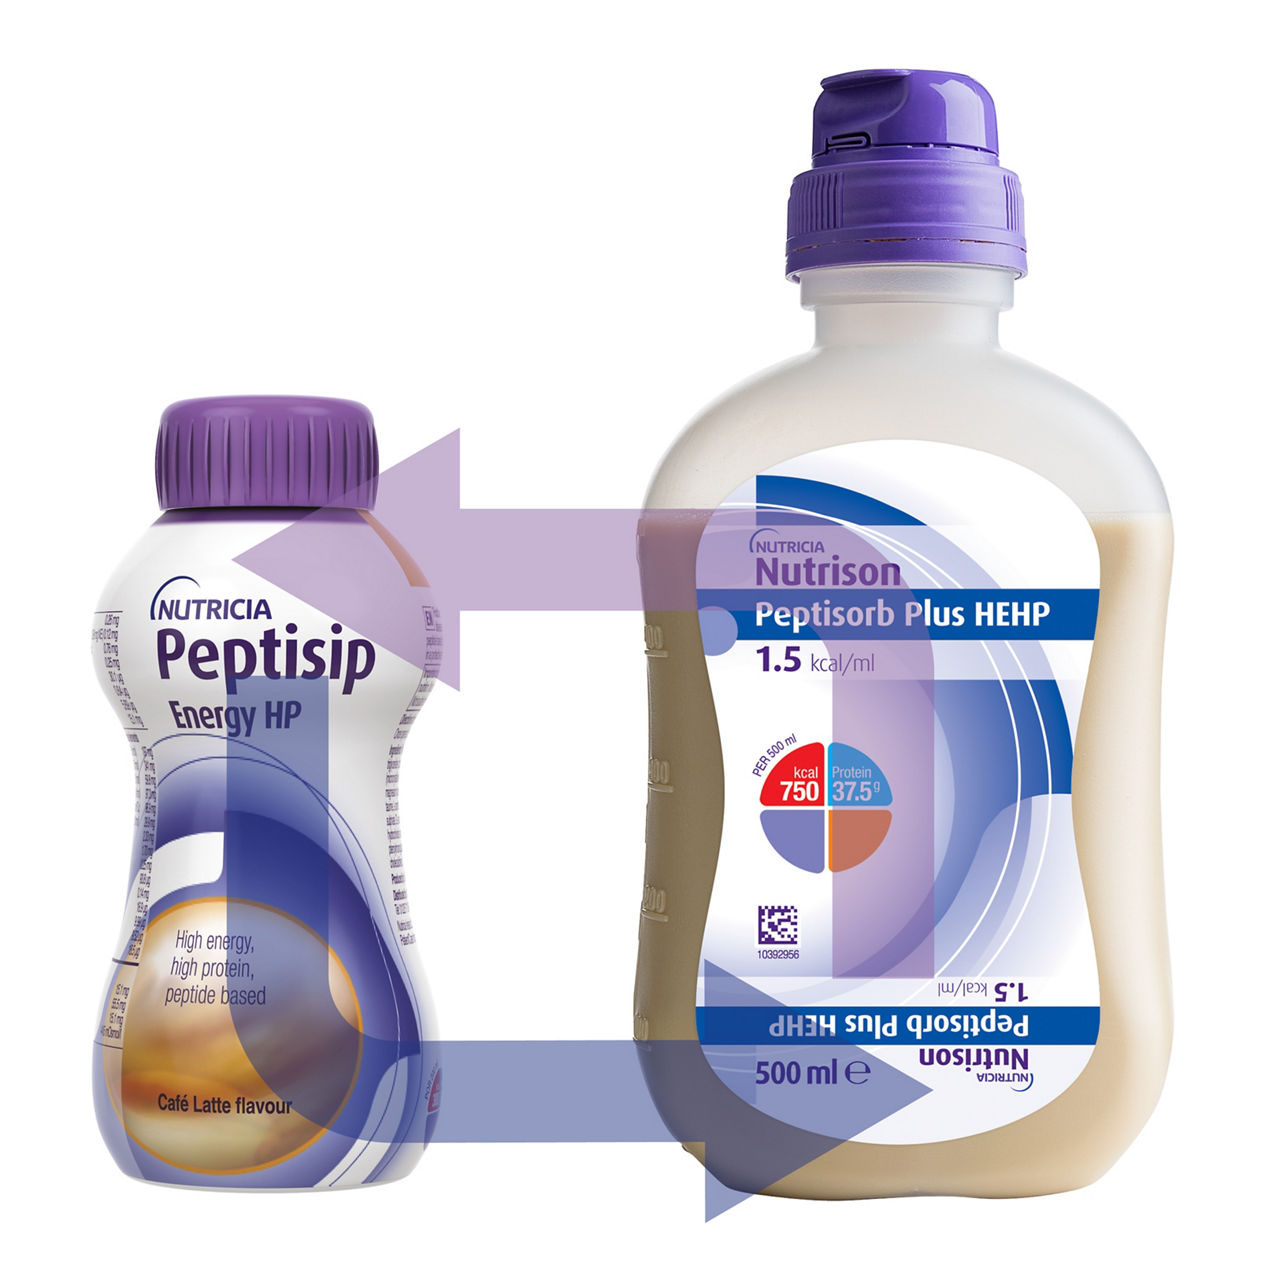 Peptisip and Peptisorb pack shots